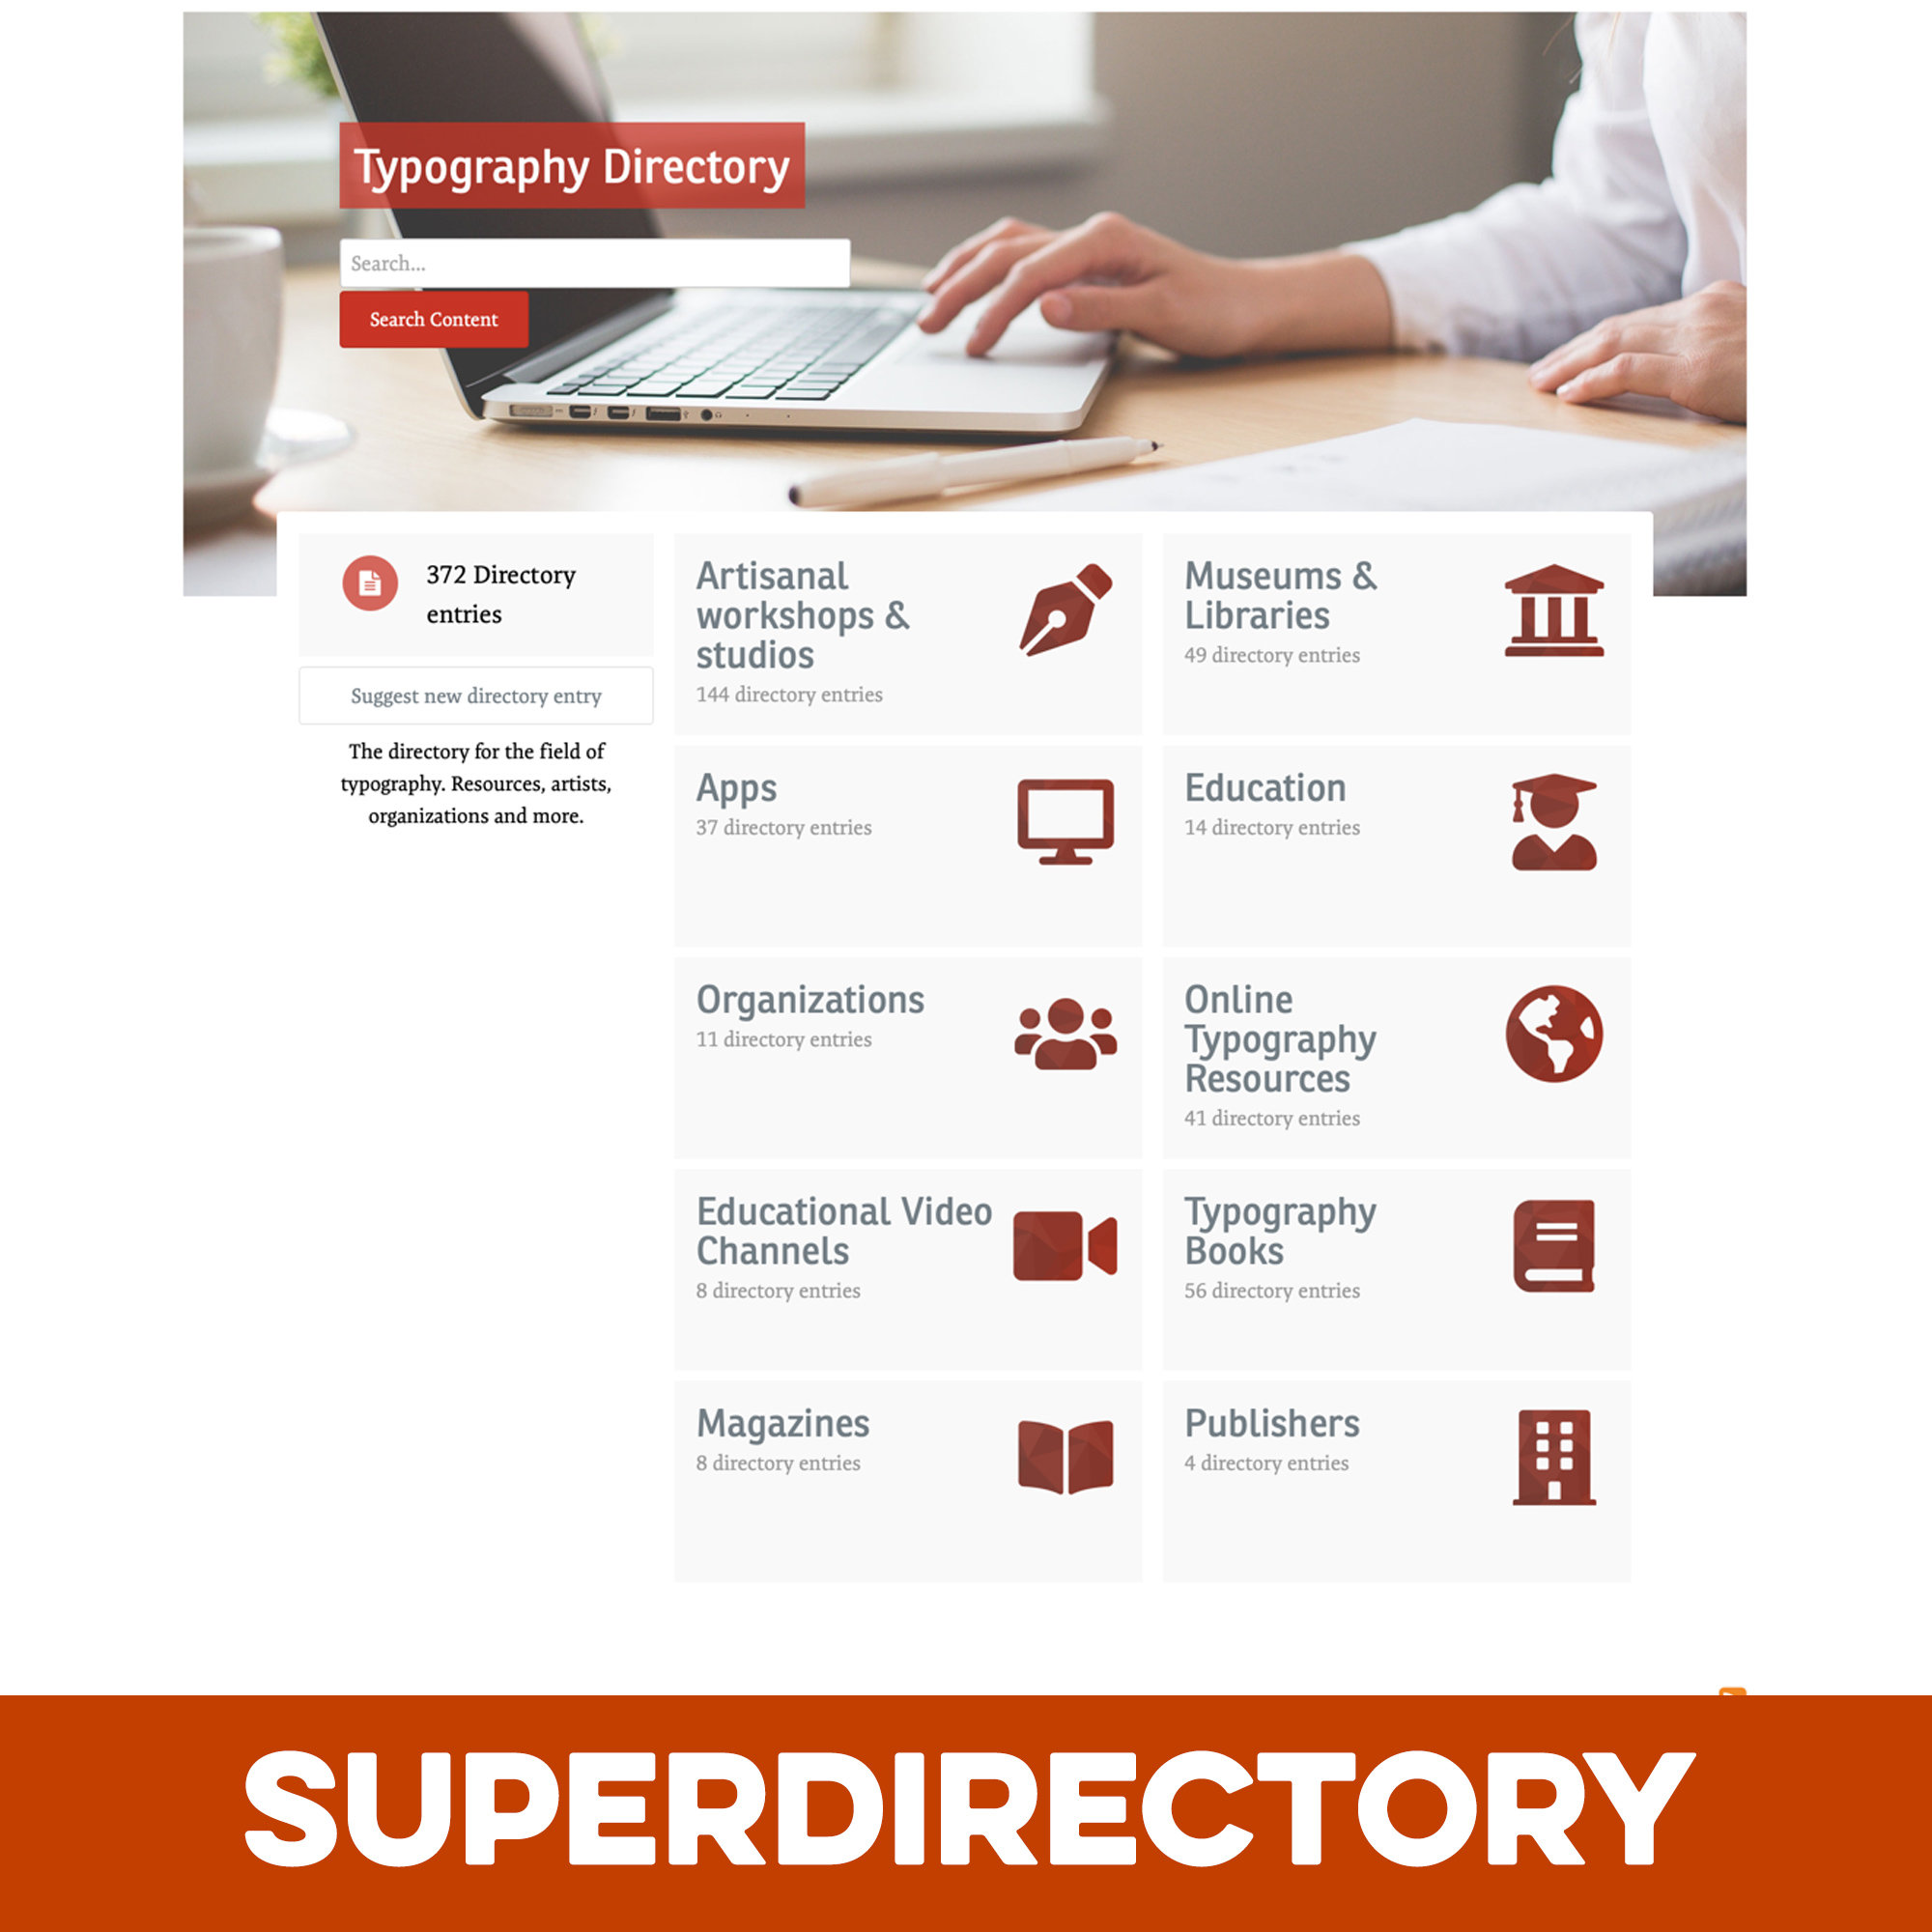 More information about "SuperDirectory"